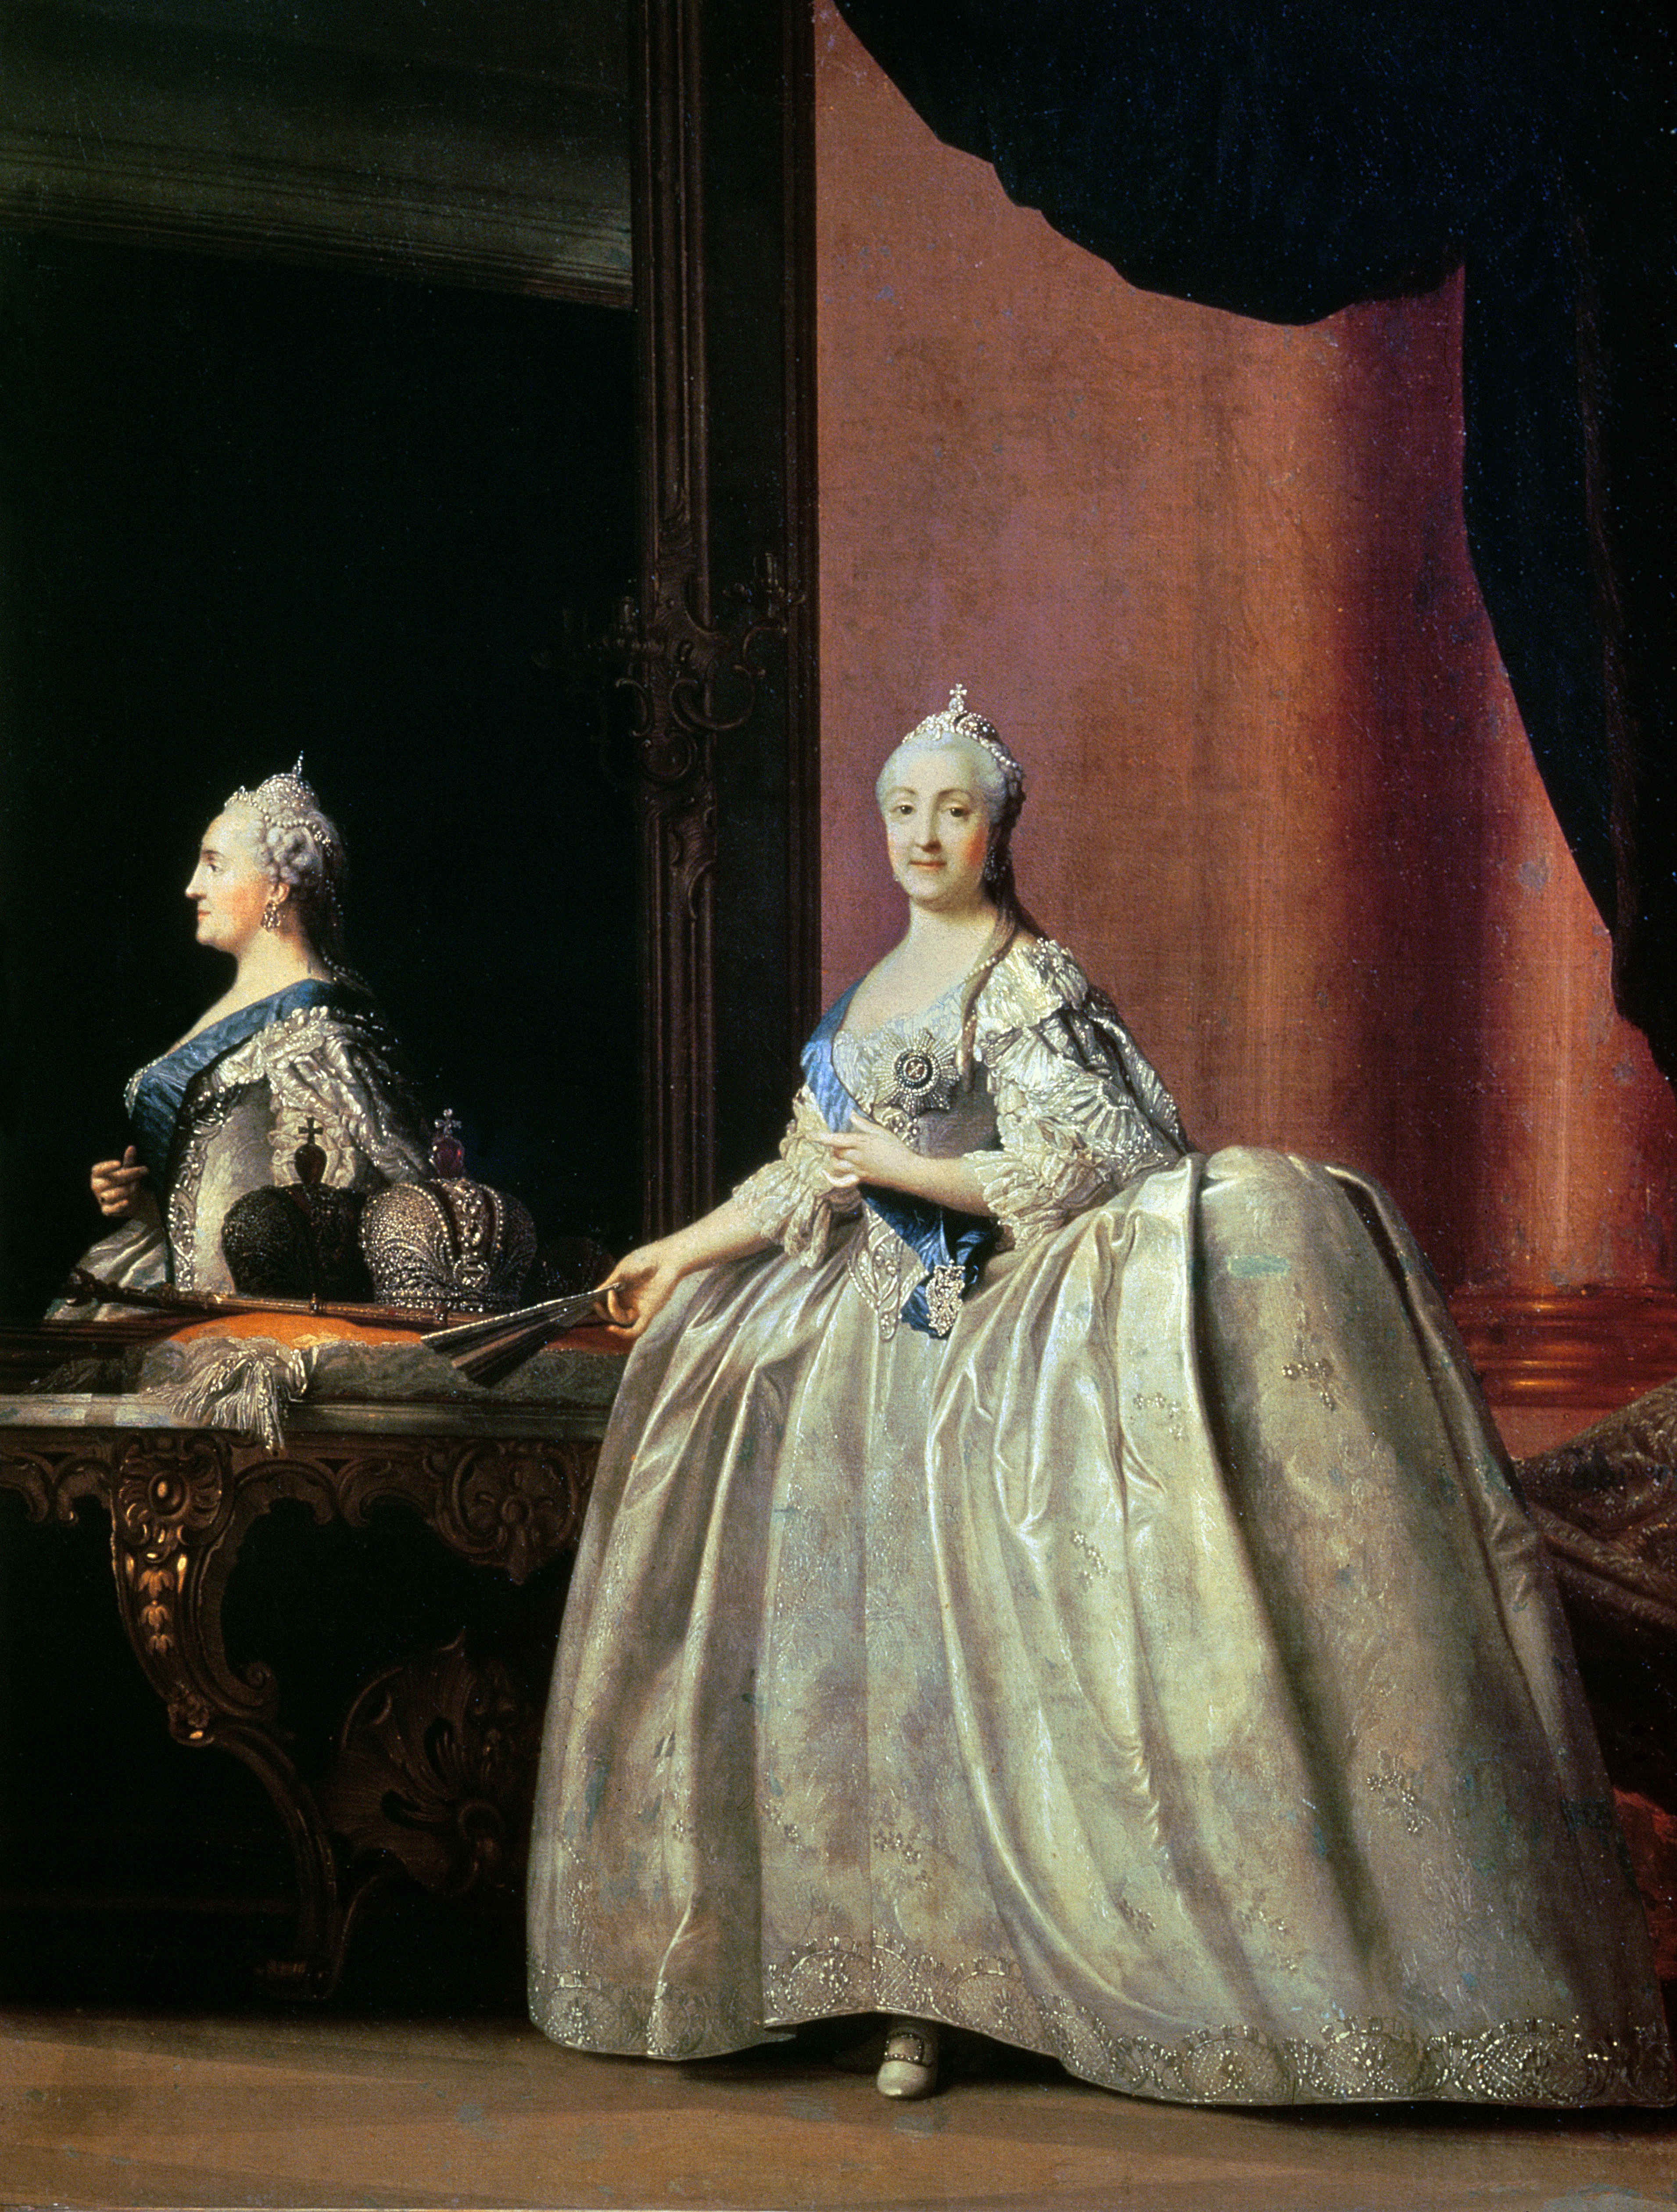 BAL244817 Empress Catherine II before the mirror, 1779 (oil on canvas) by Erichsen, Vigilius (1722-82); 72x55 cm; State Russian Museum, St. Petersburg, Russia; (add.info.: married to Tsar Peter III (1728-62); Catherine the Great (1729-96);); Danish, out of copyright